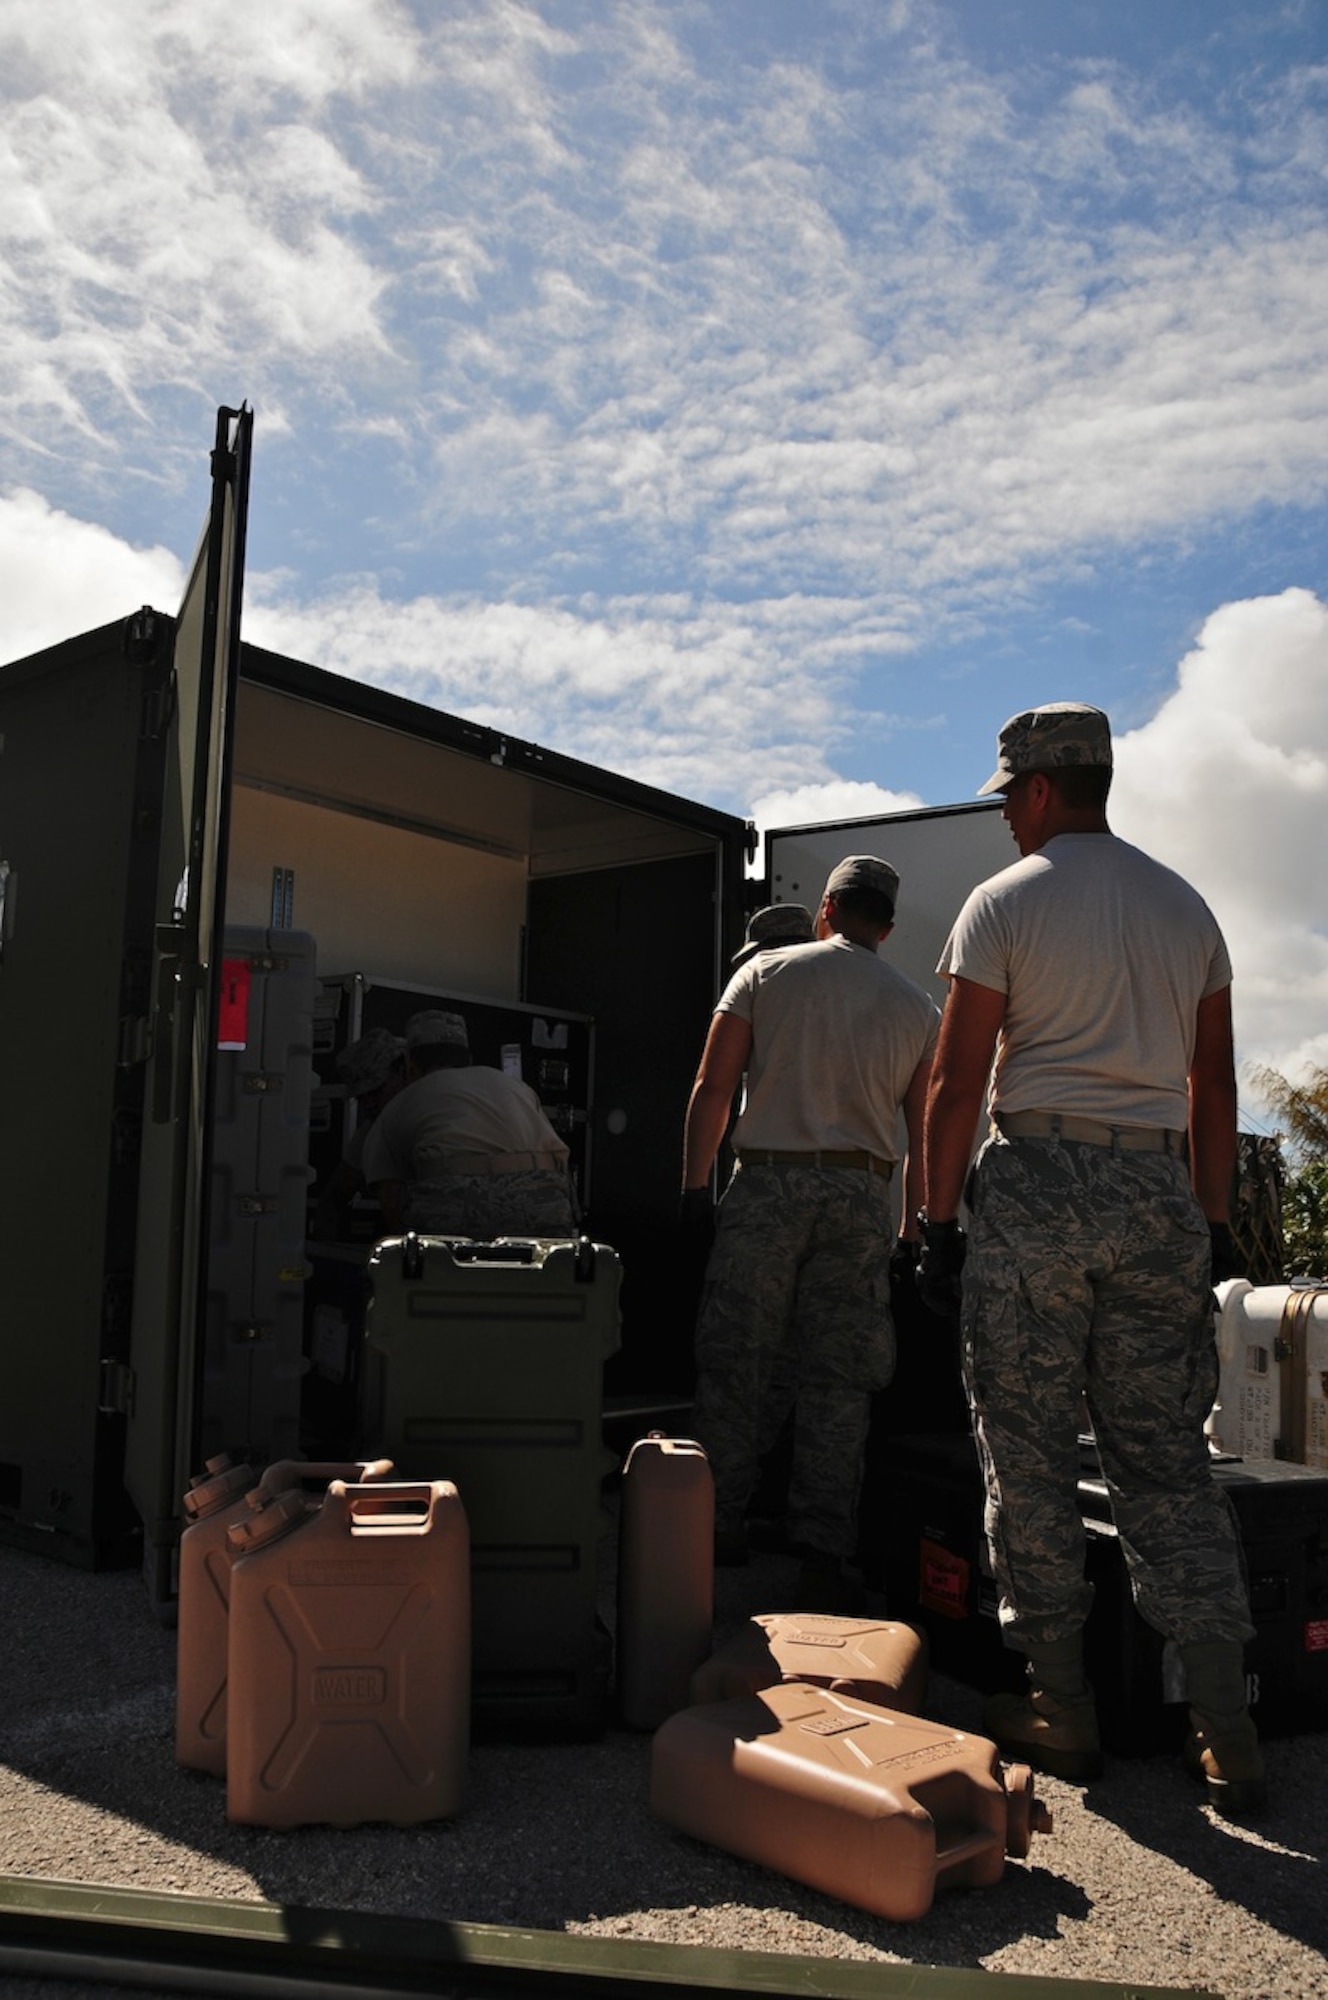 The 644th Combat Communications Squadron members ensure their equipment is properly packed in pallets and containers for its transportation to simulated Forward Operating Base Dragon hill April 17. The 644 CBCS is conducting a deployment exercise from April 16 to 27 in order to test their capabilities in the field and improve their war-fighting capabilities. (U.S. Air Force photo by Airman 1st Class Marianique Santos)